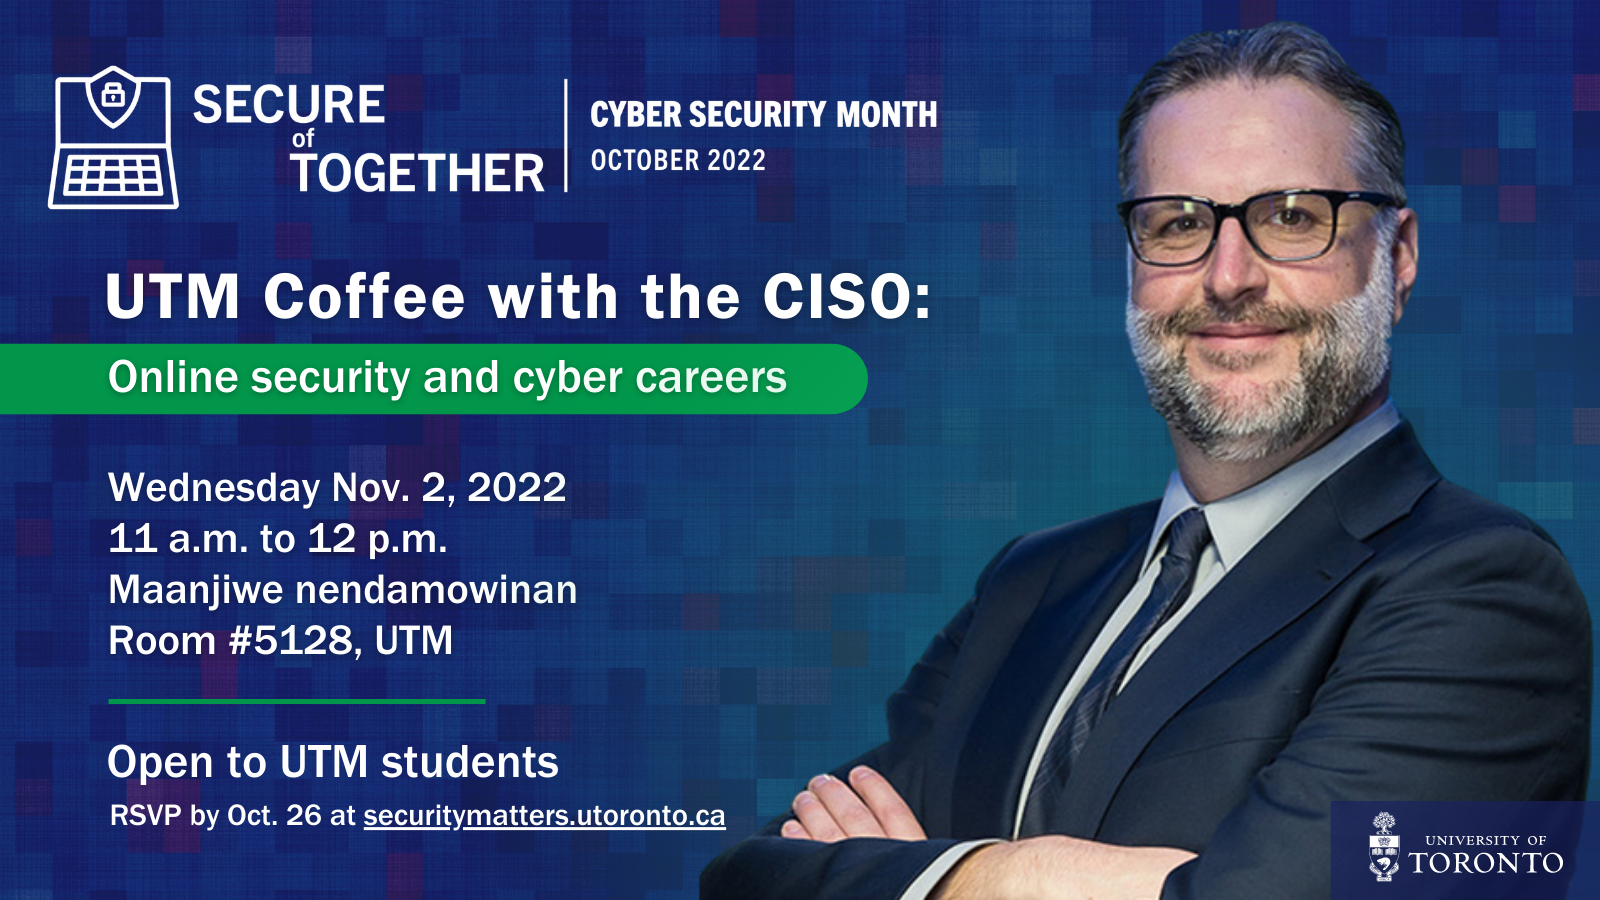 UTM Coffee with the CISO